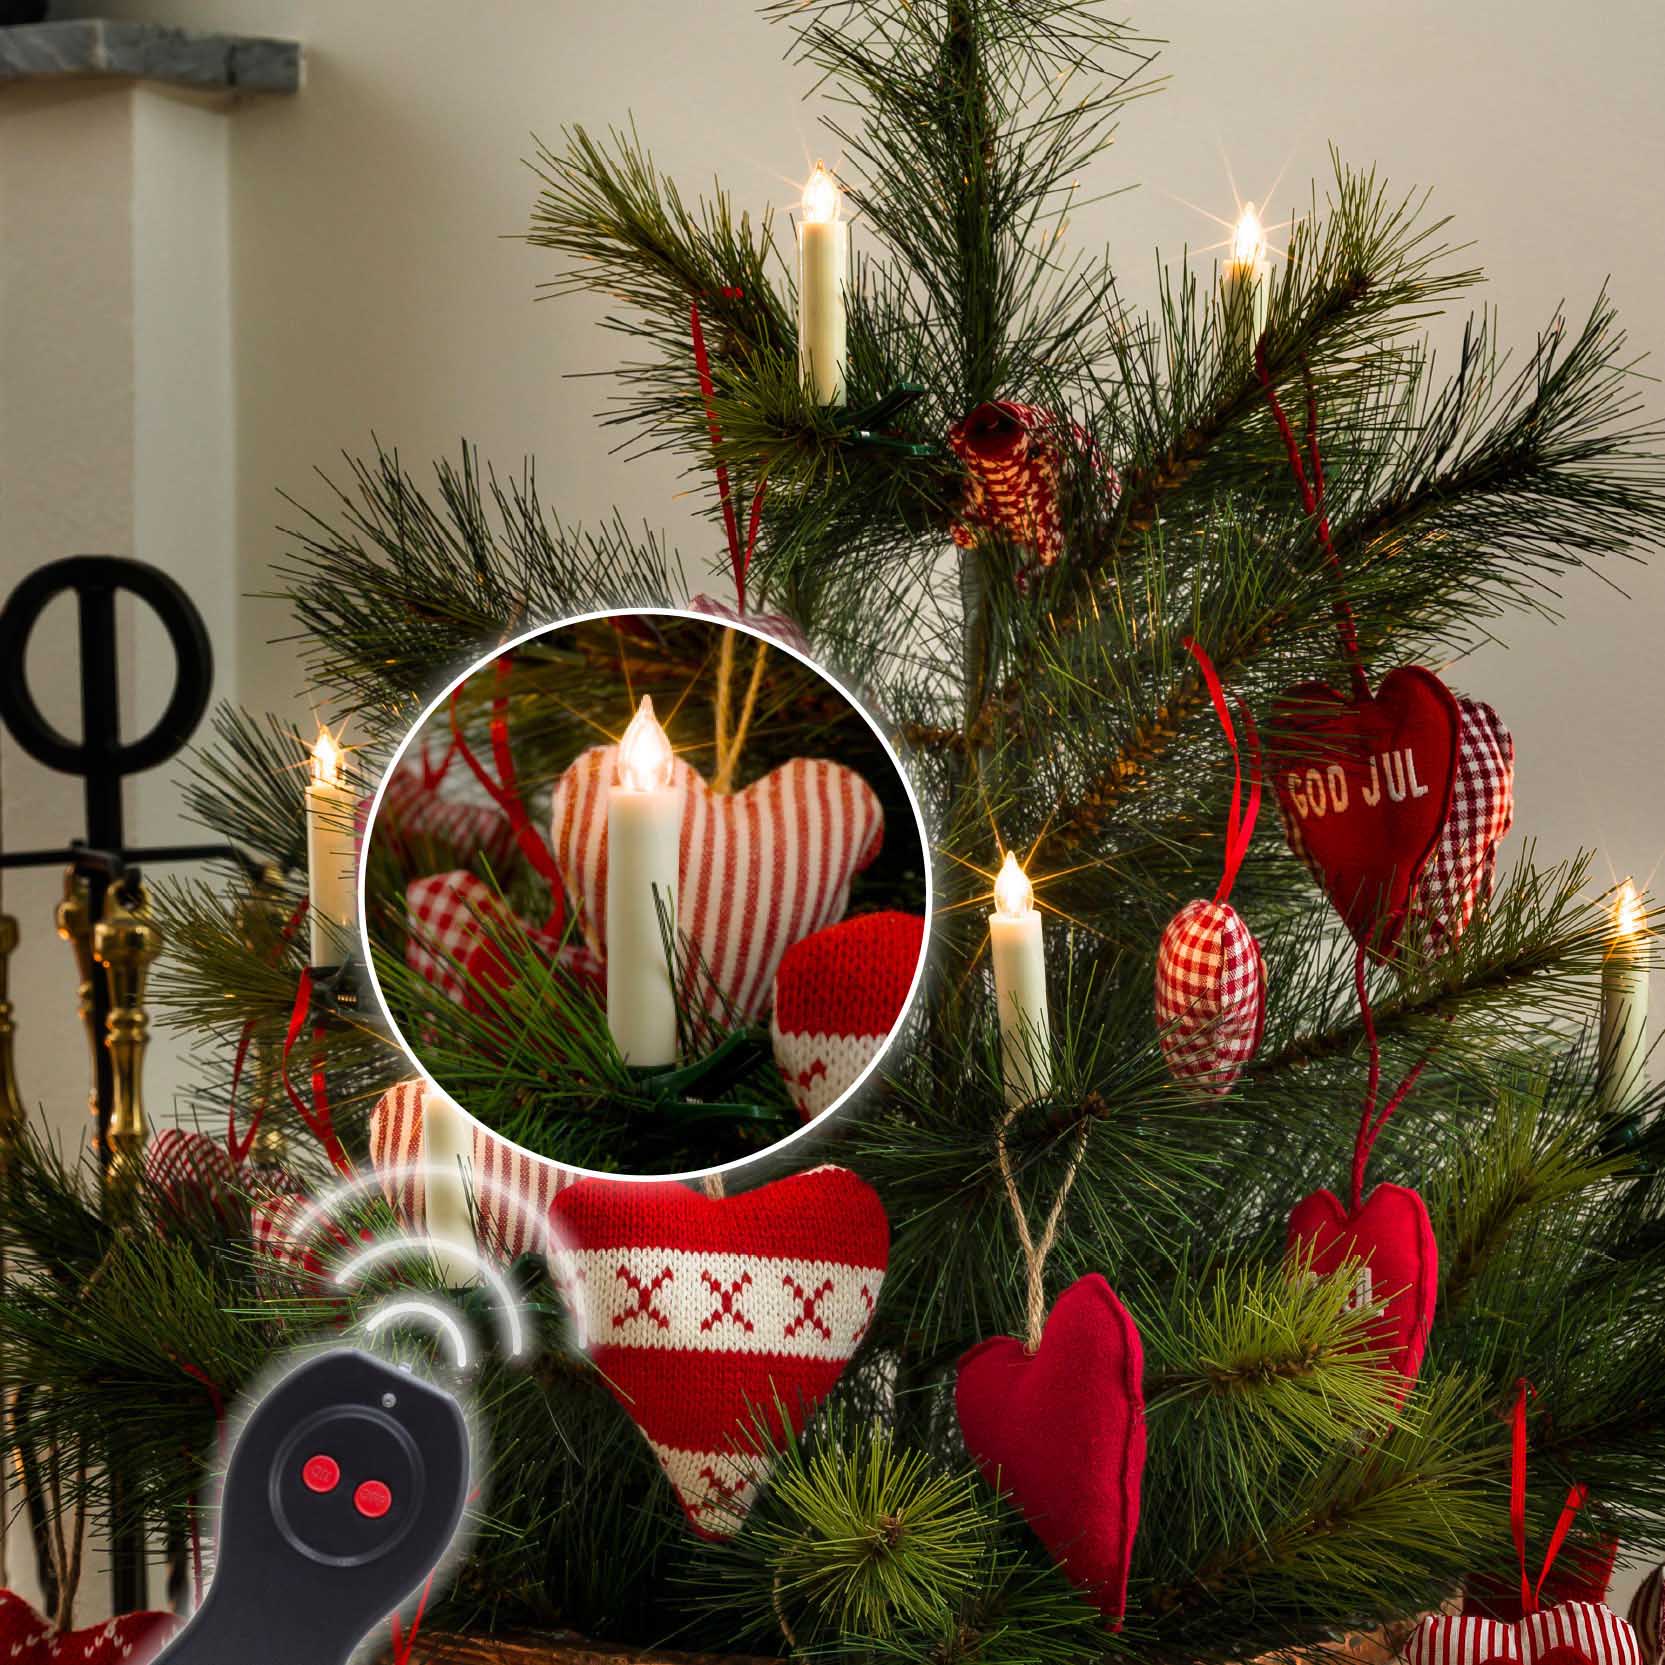 LED Christmas tree light with remote control, 10 candles